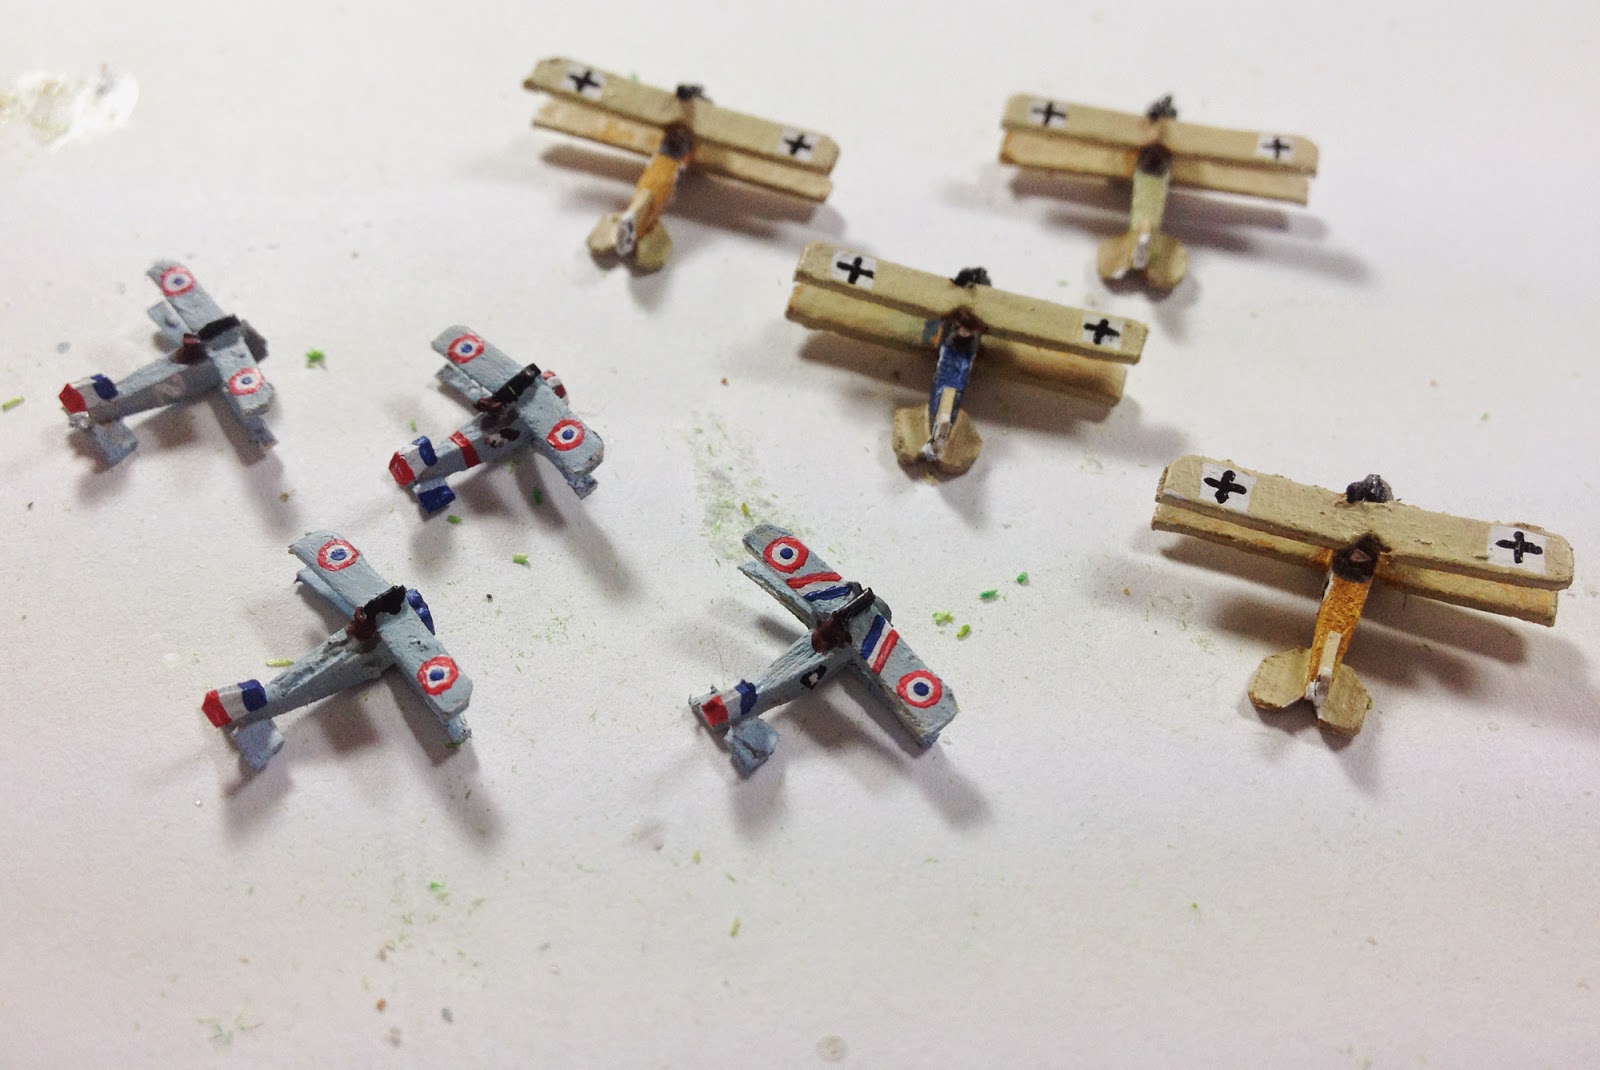 The Stronghold Rebuilt: More Micro Planes - Part 2